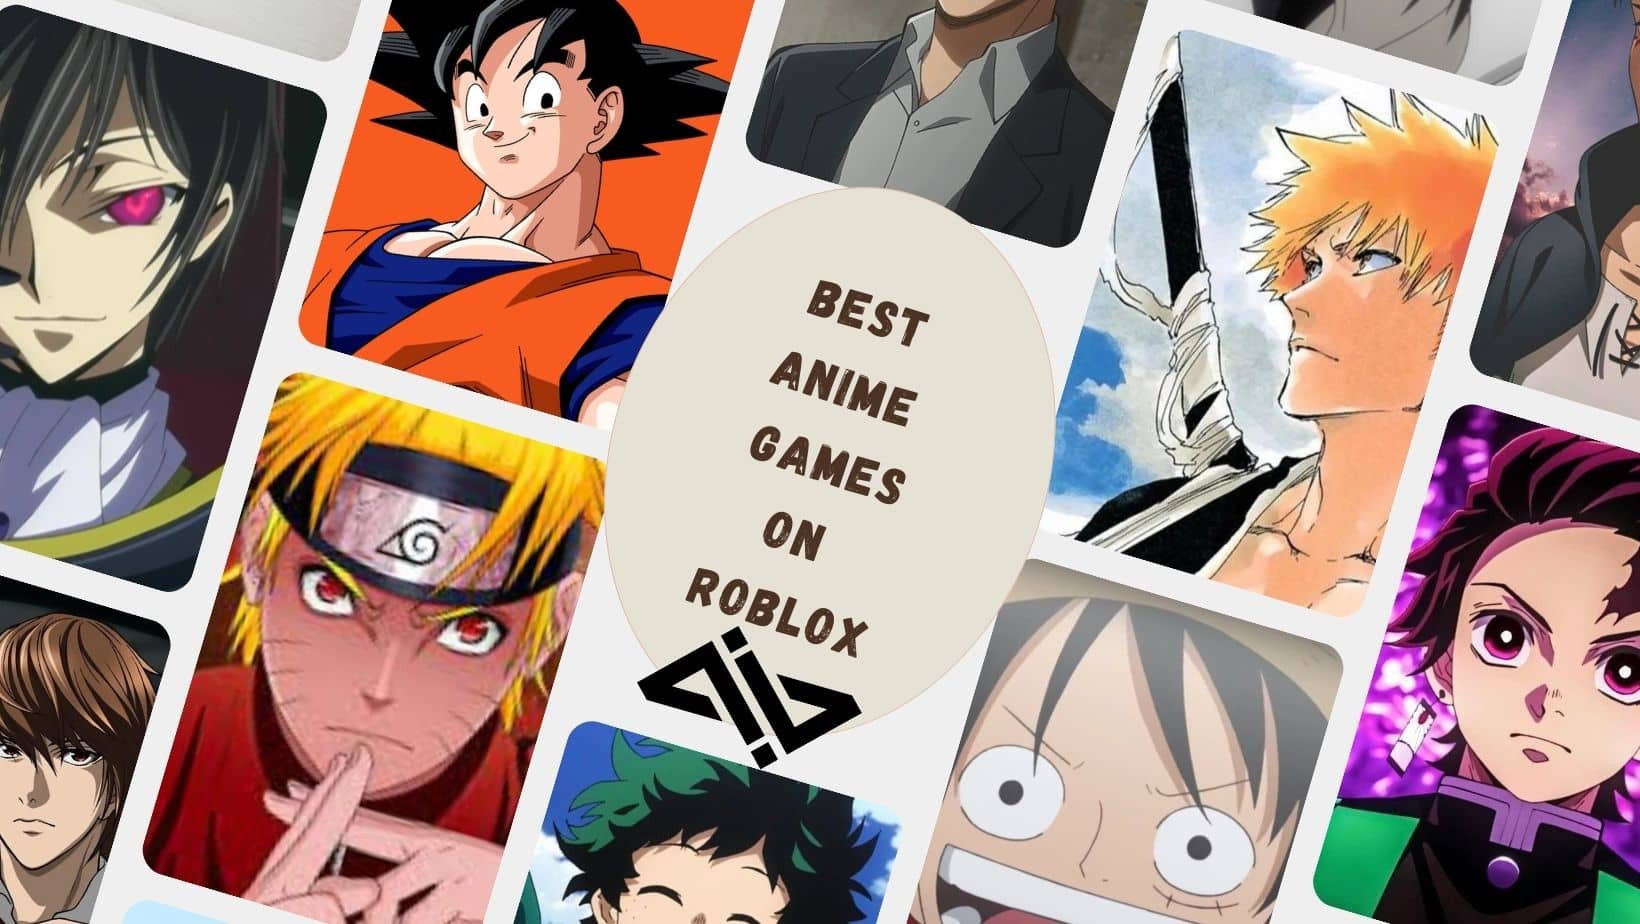 Best anime games on roblox